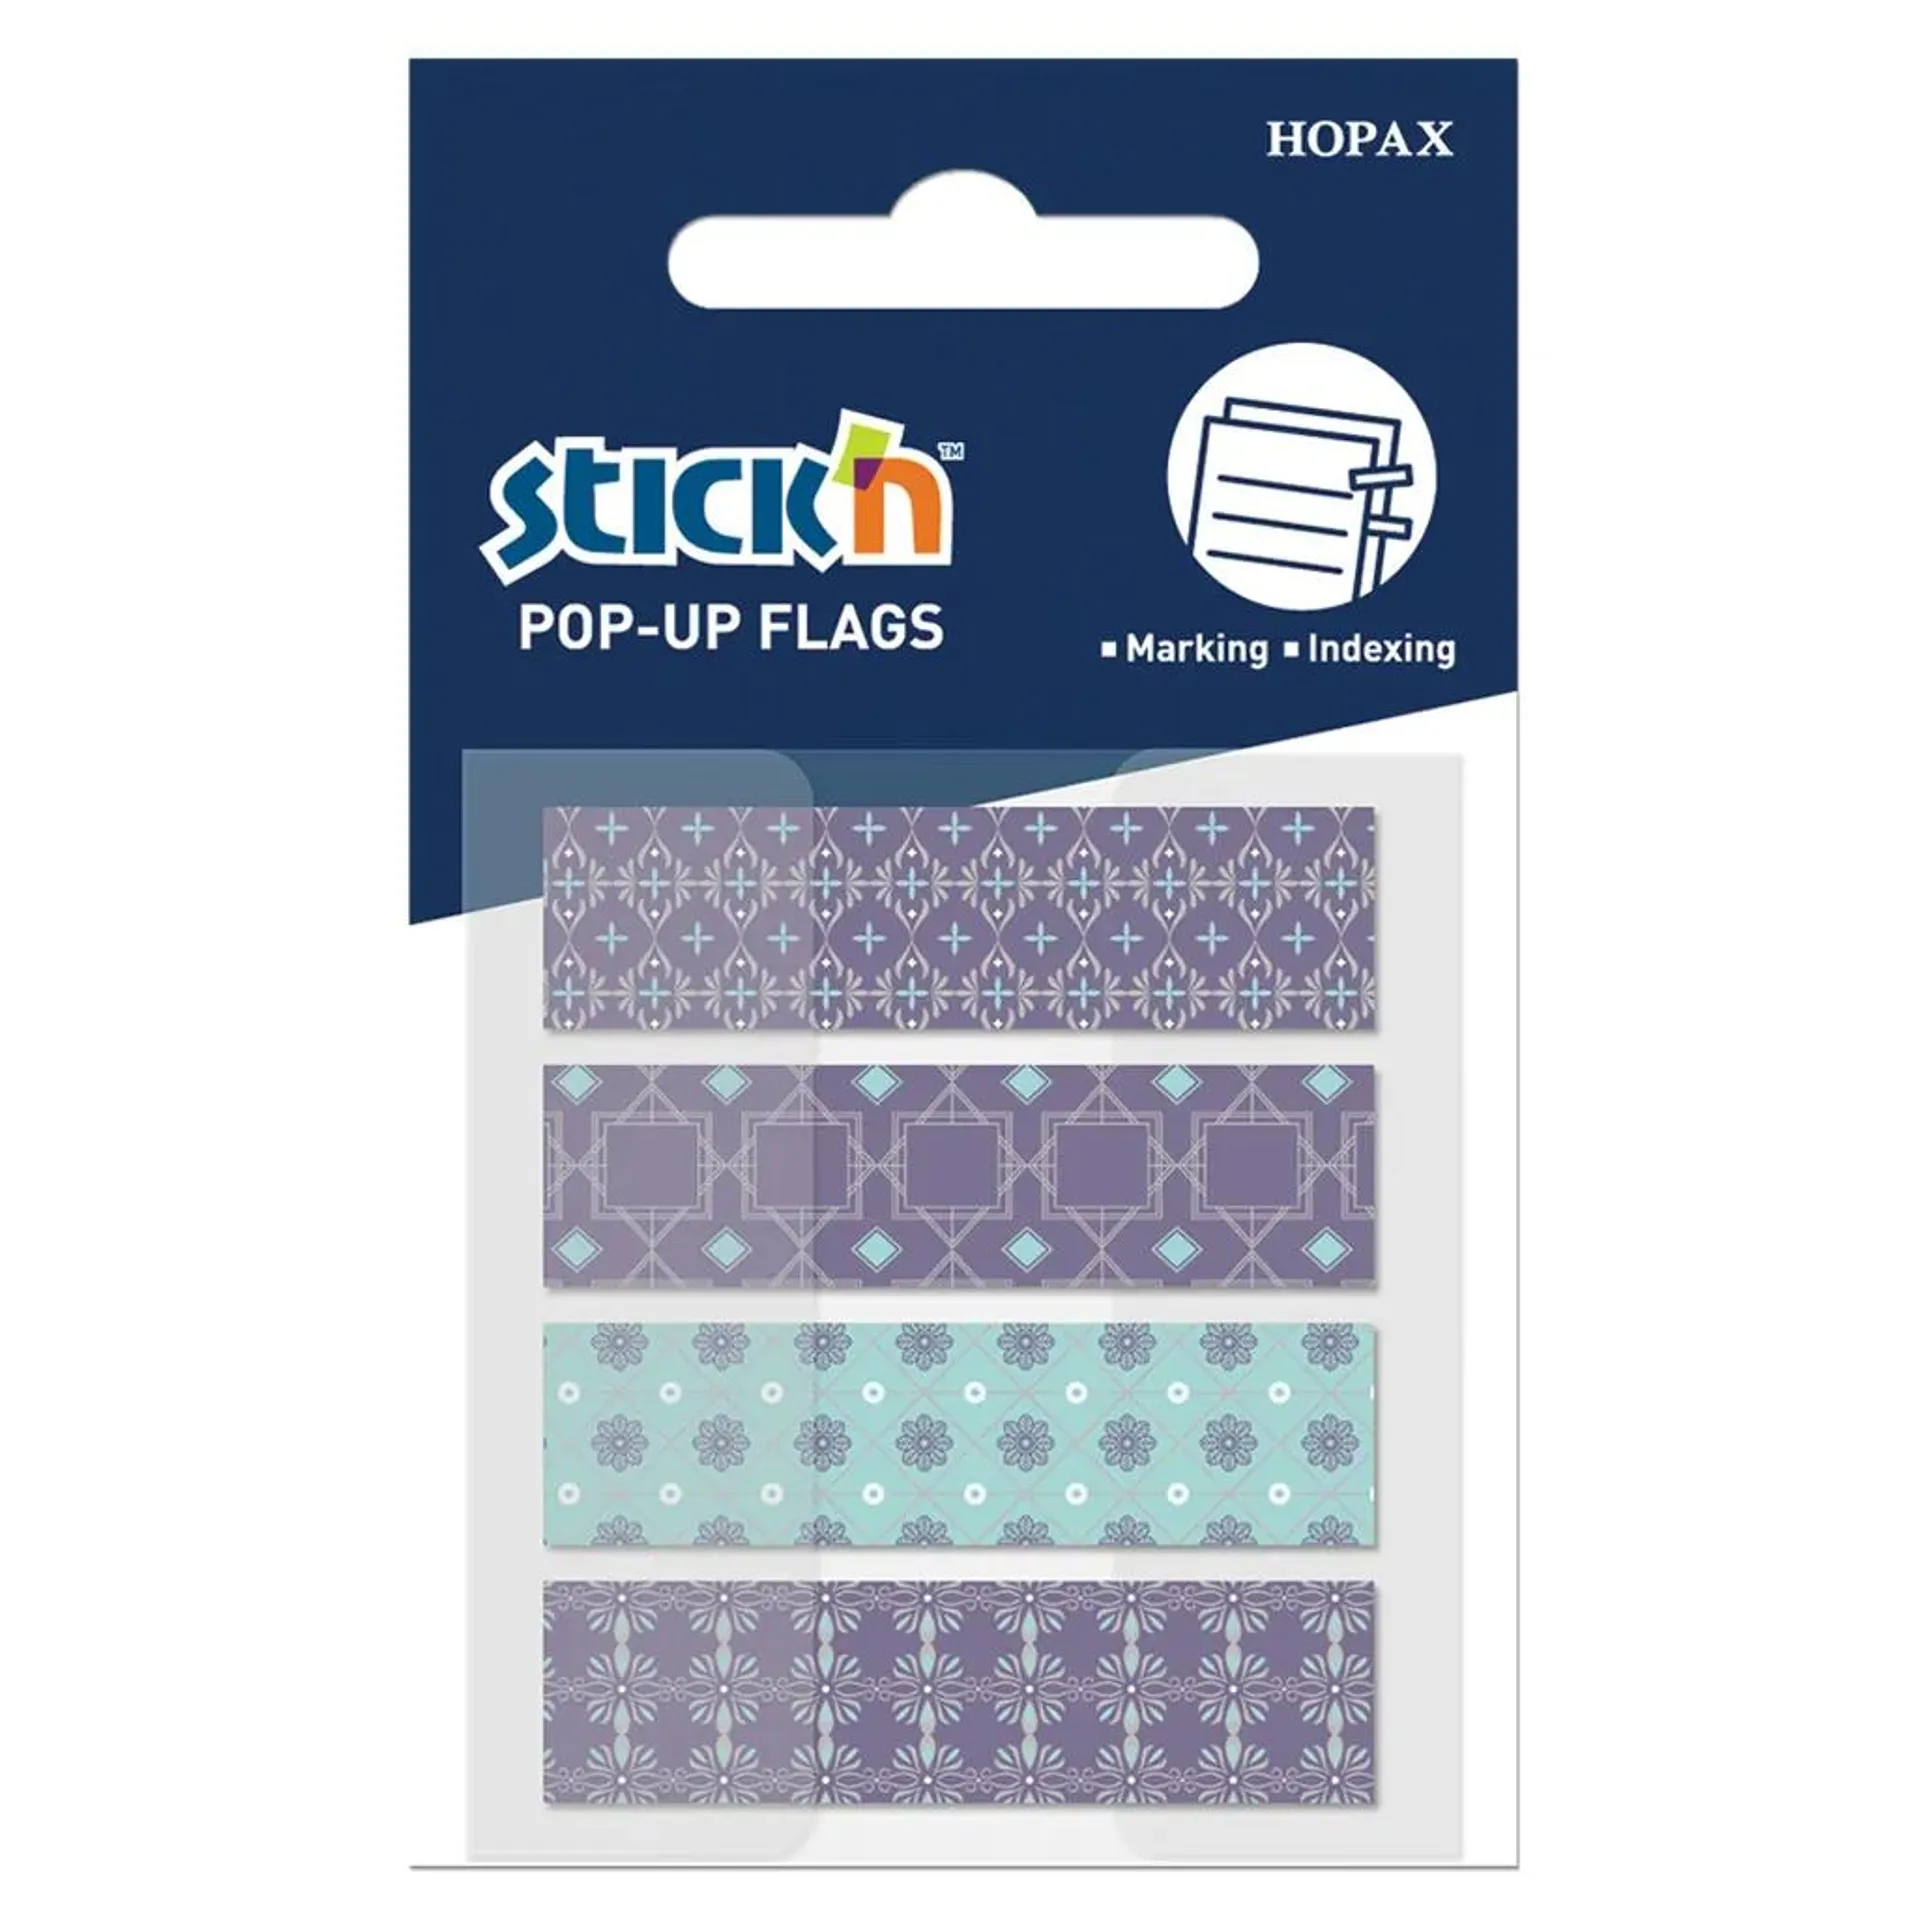 Pop Up Flags - 45 x 12mm 20 Flags - Navy - 4 Pack